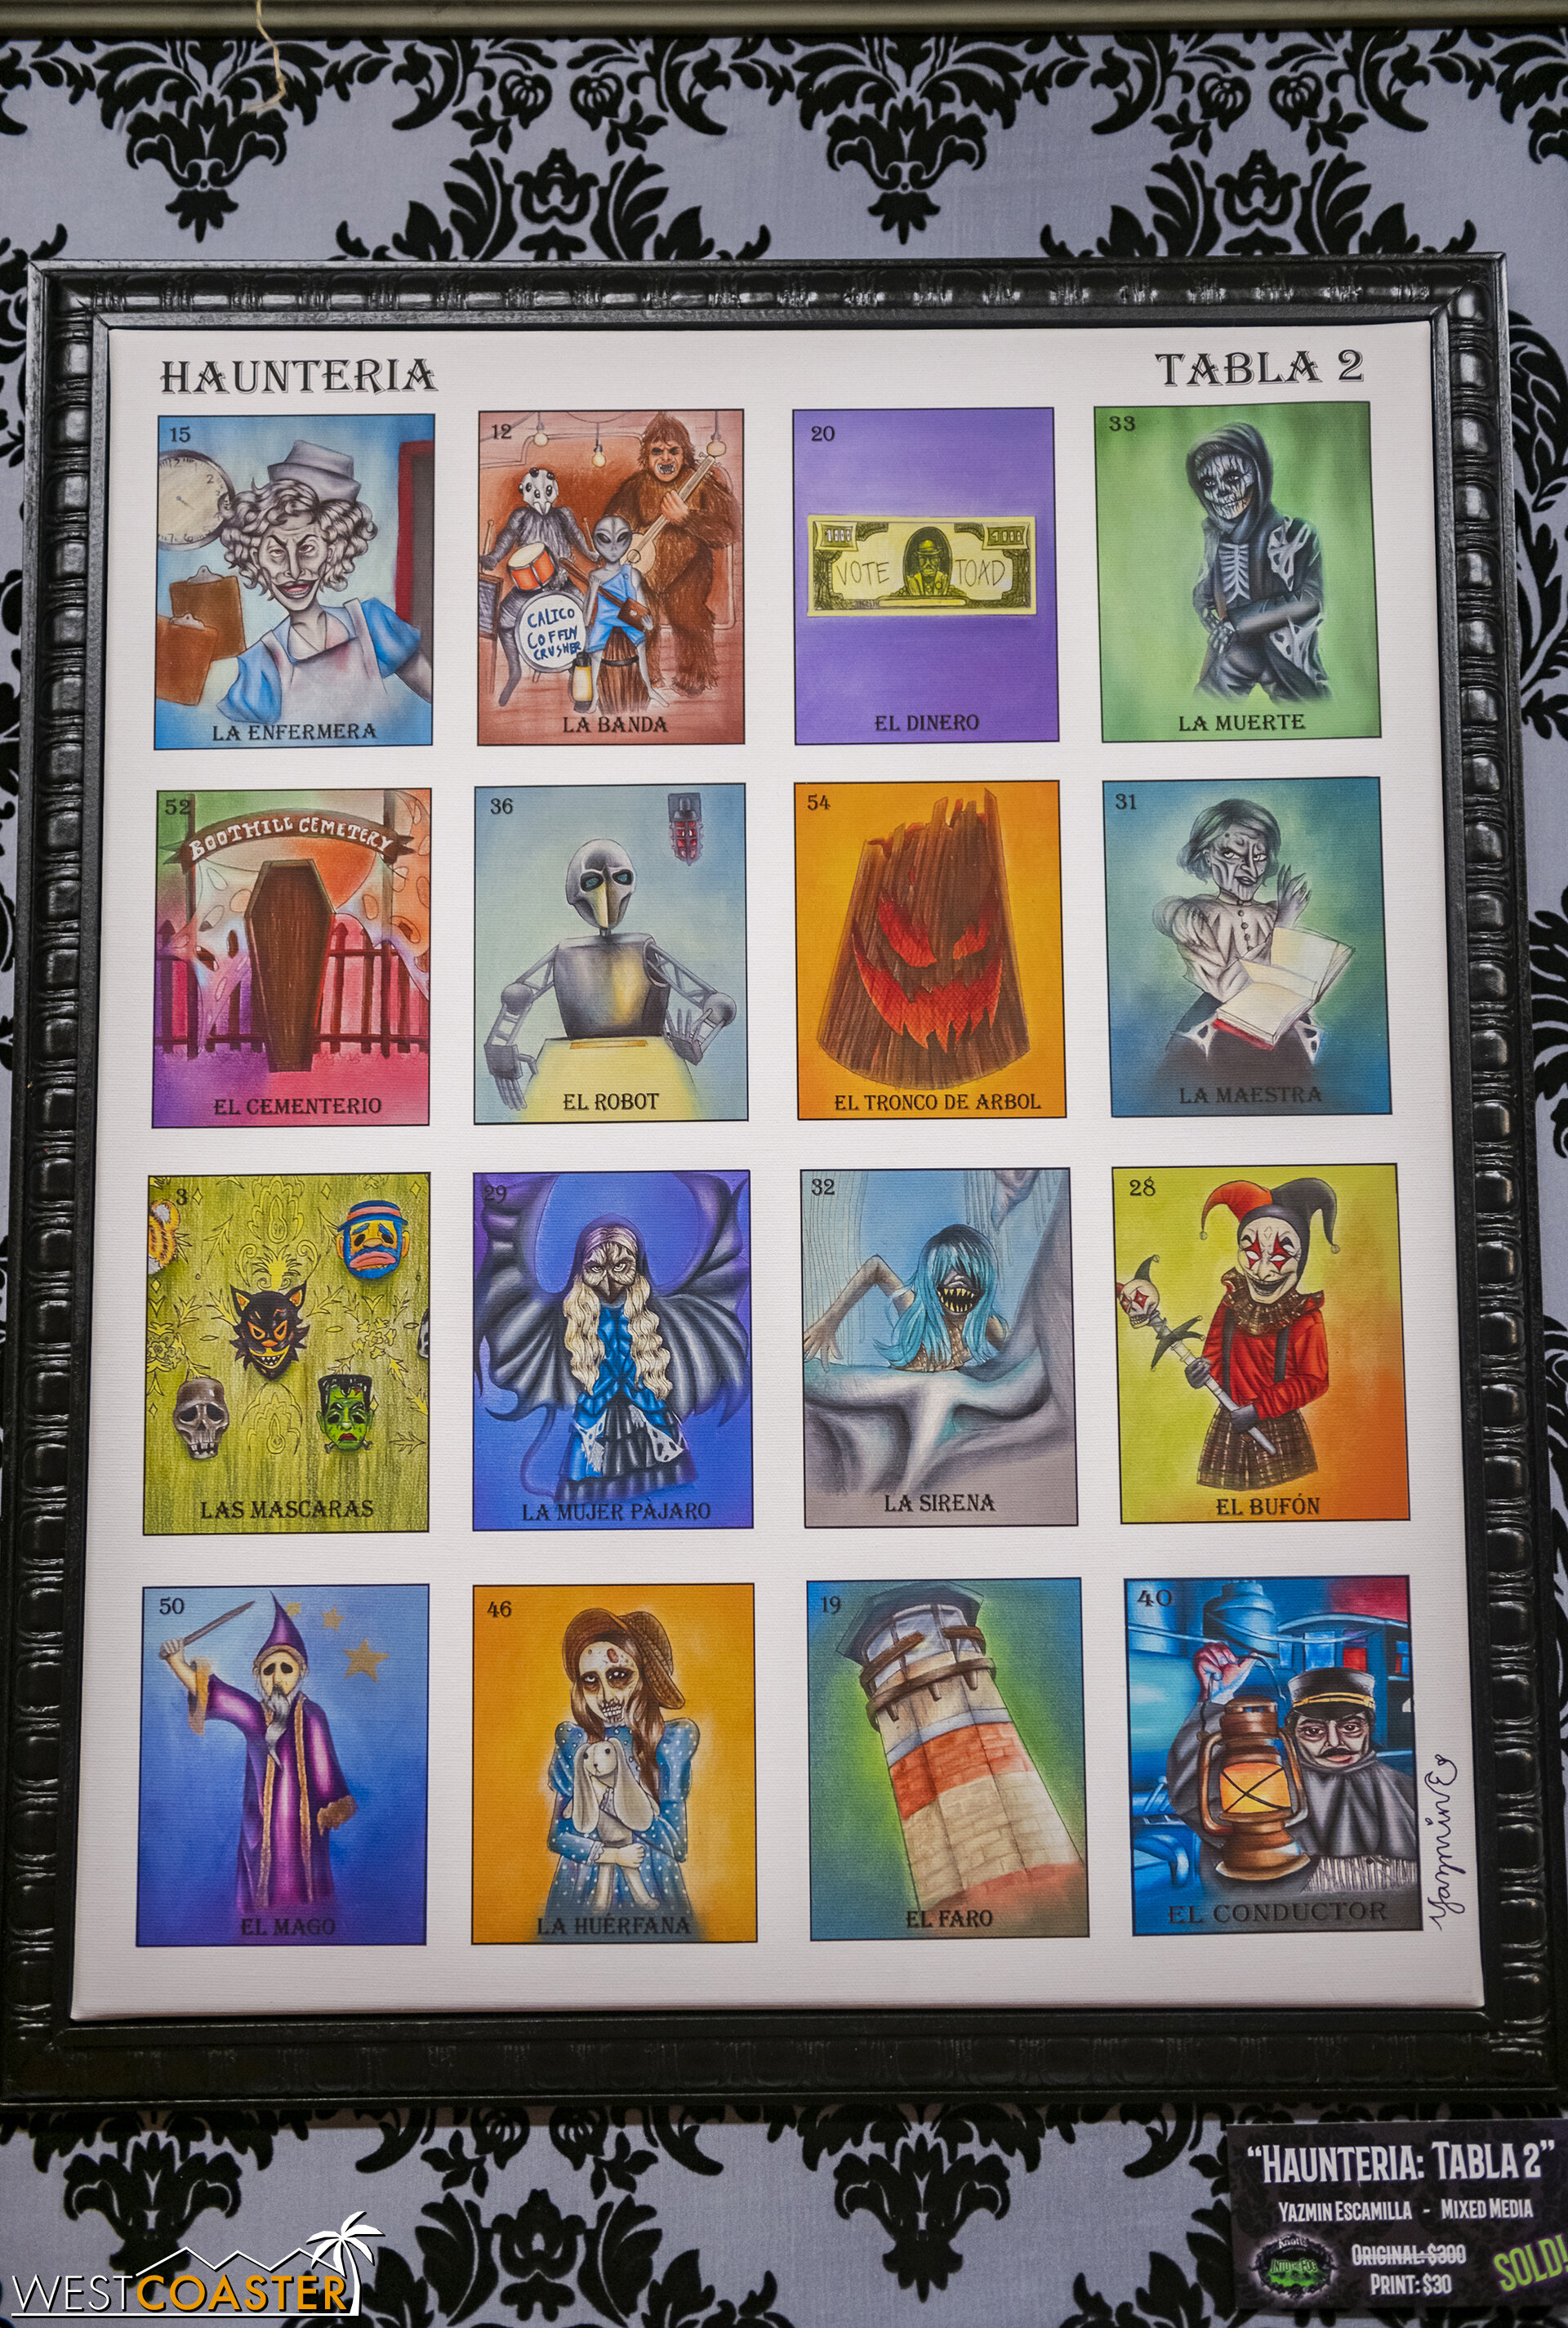  This mix of Haunt and loteria cards was very creative! 